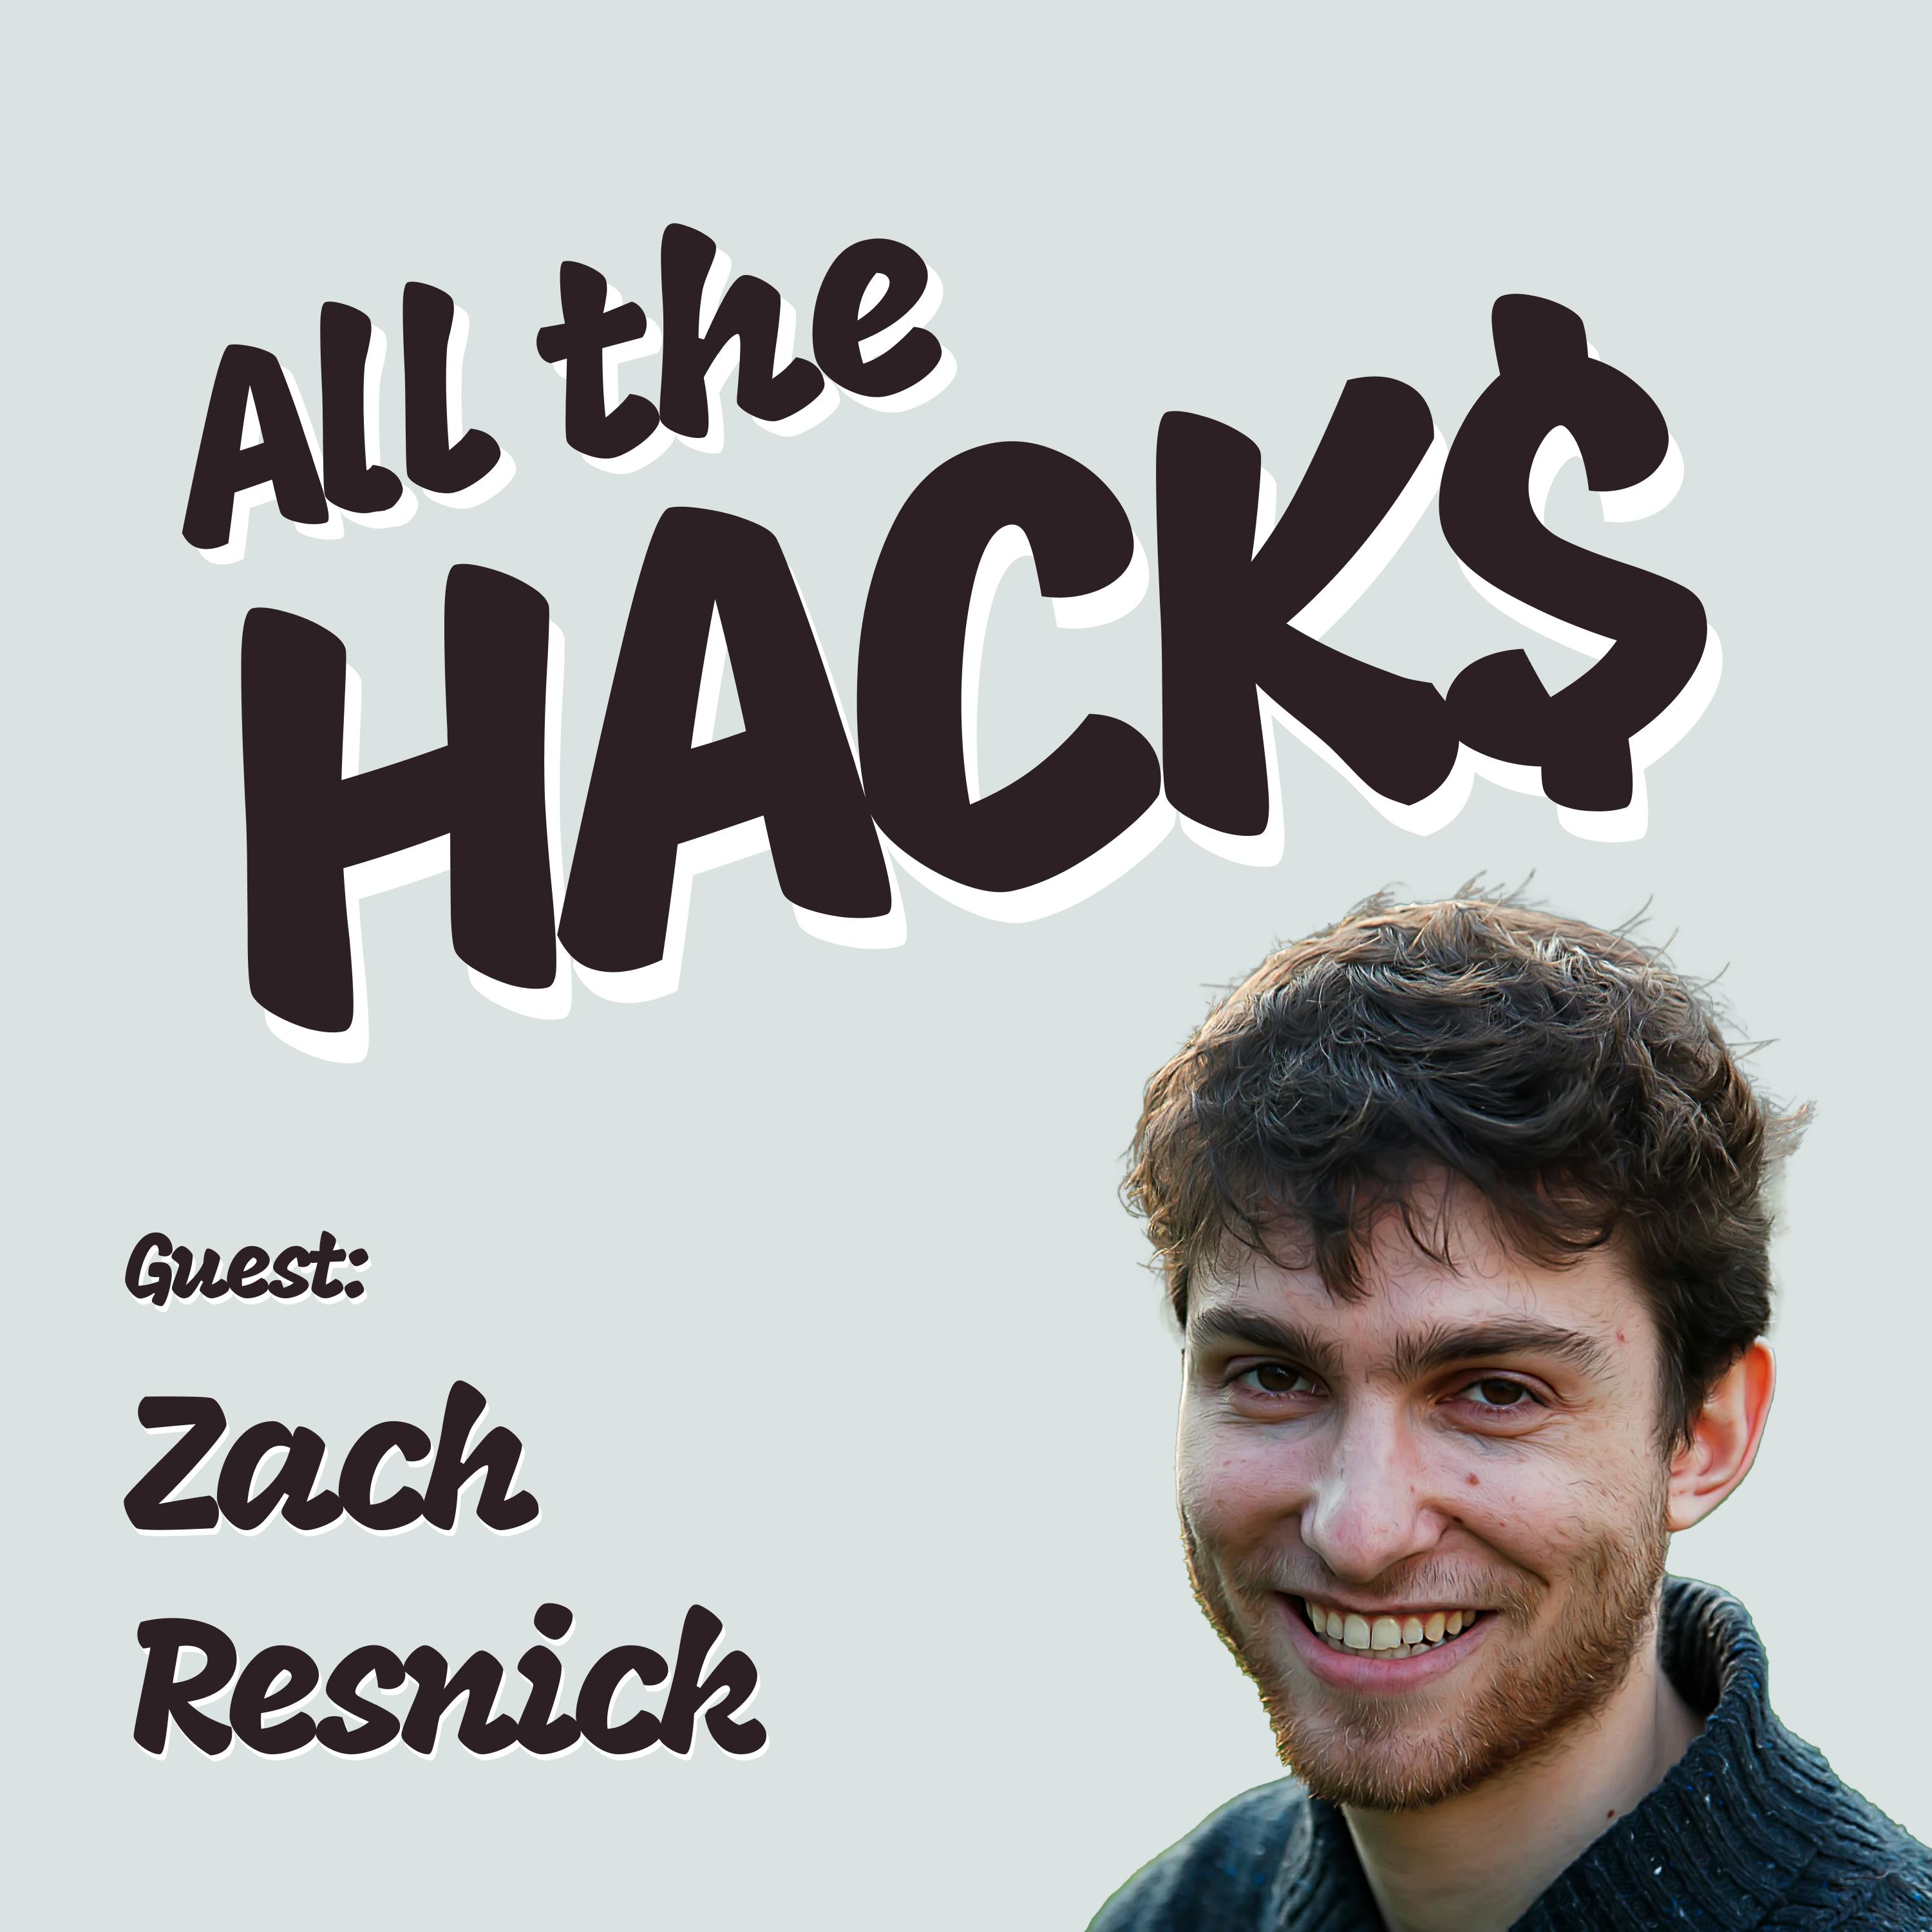 Finding the Best Deal on Flights with Zach Resnick